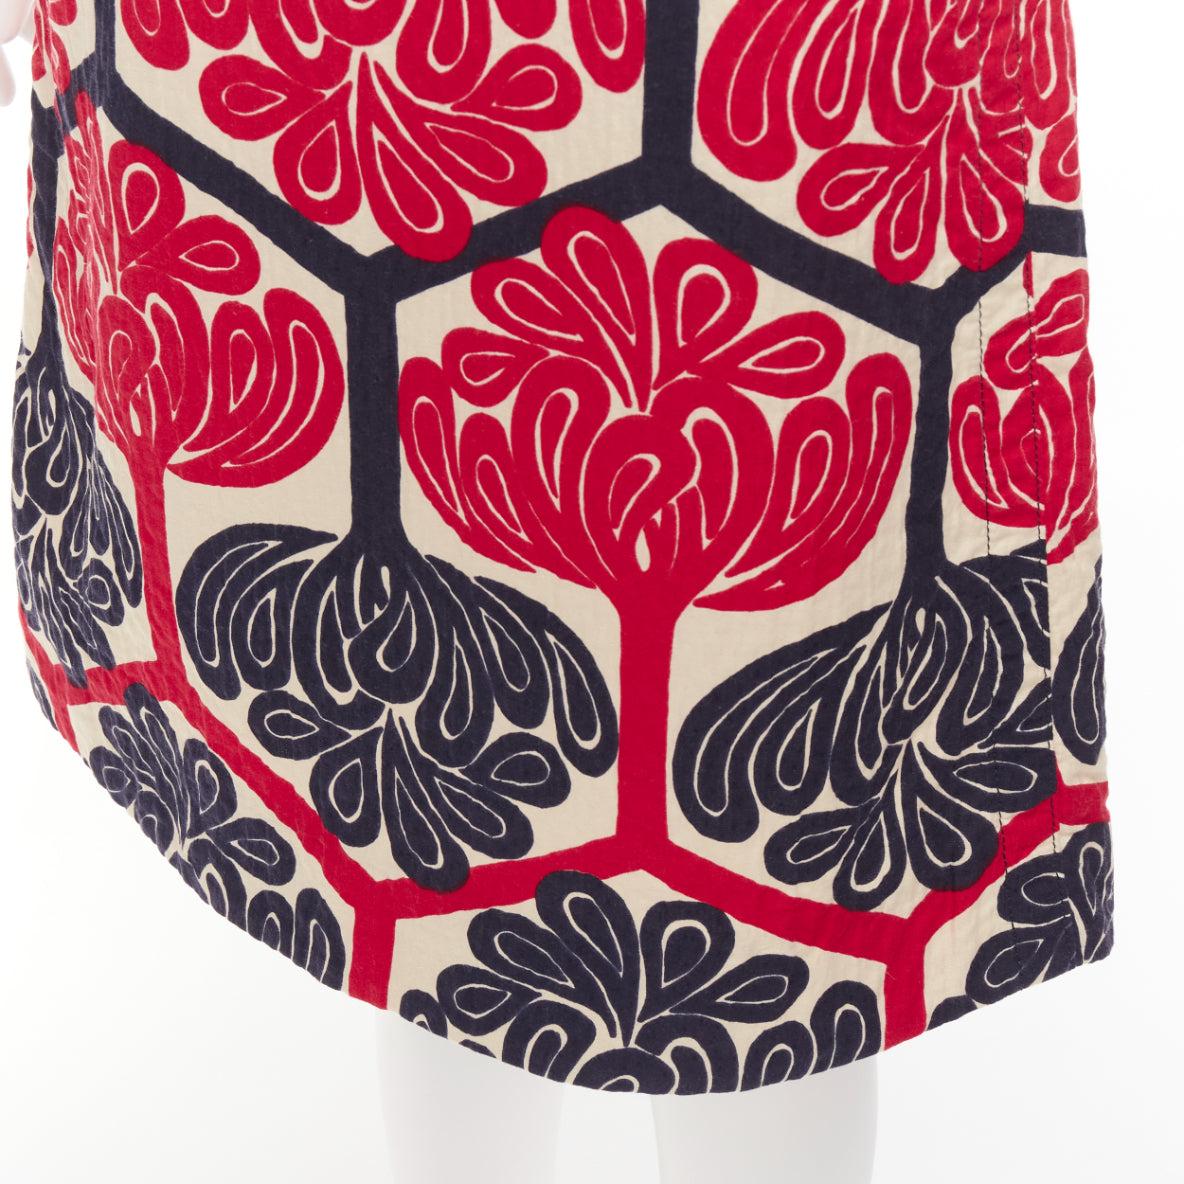 MARNI 2011 red navy cream ethnic print cotton Aline knee skirt IT38 XS
Reference: NKLL/A00219
Brand: Marni
Collection: 2011
Material: Cotton
Color: Red, Cream
Pattern: Floral
Closure: Zip
Lining: White Fabric
Extra Details: Back zip.
Made in: